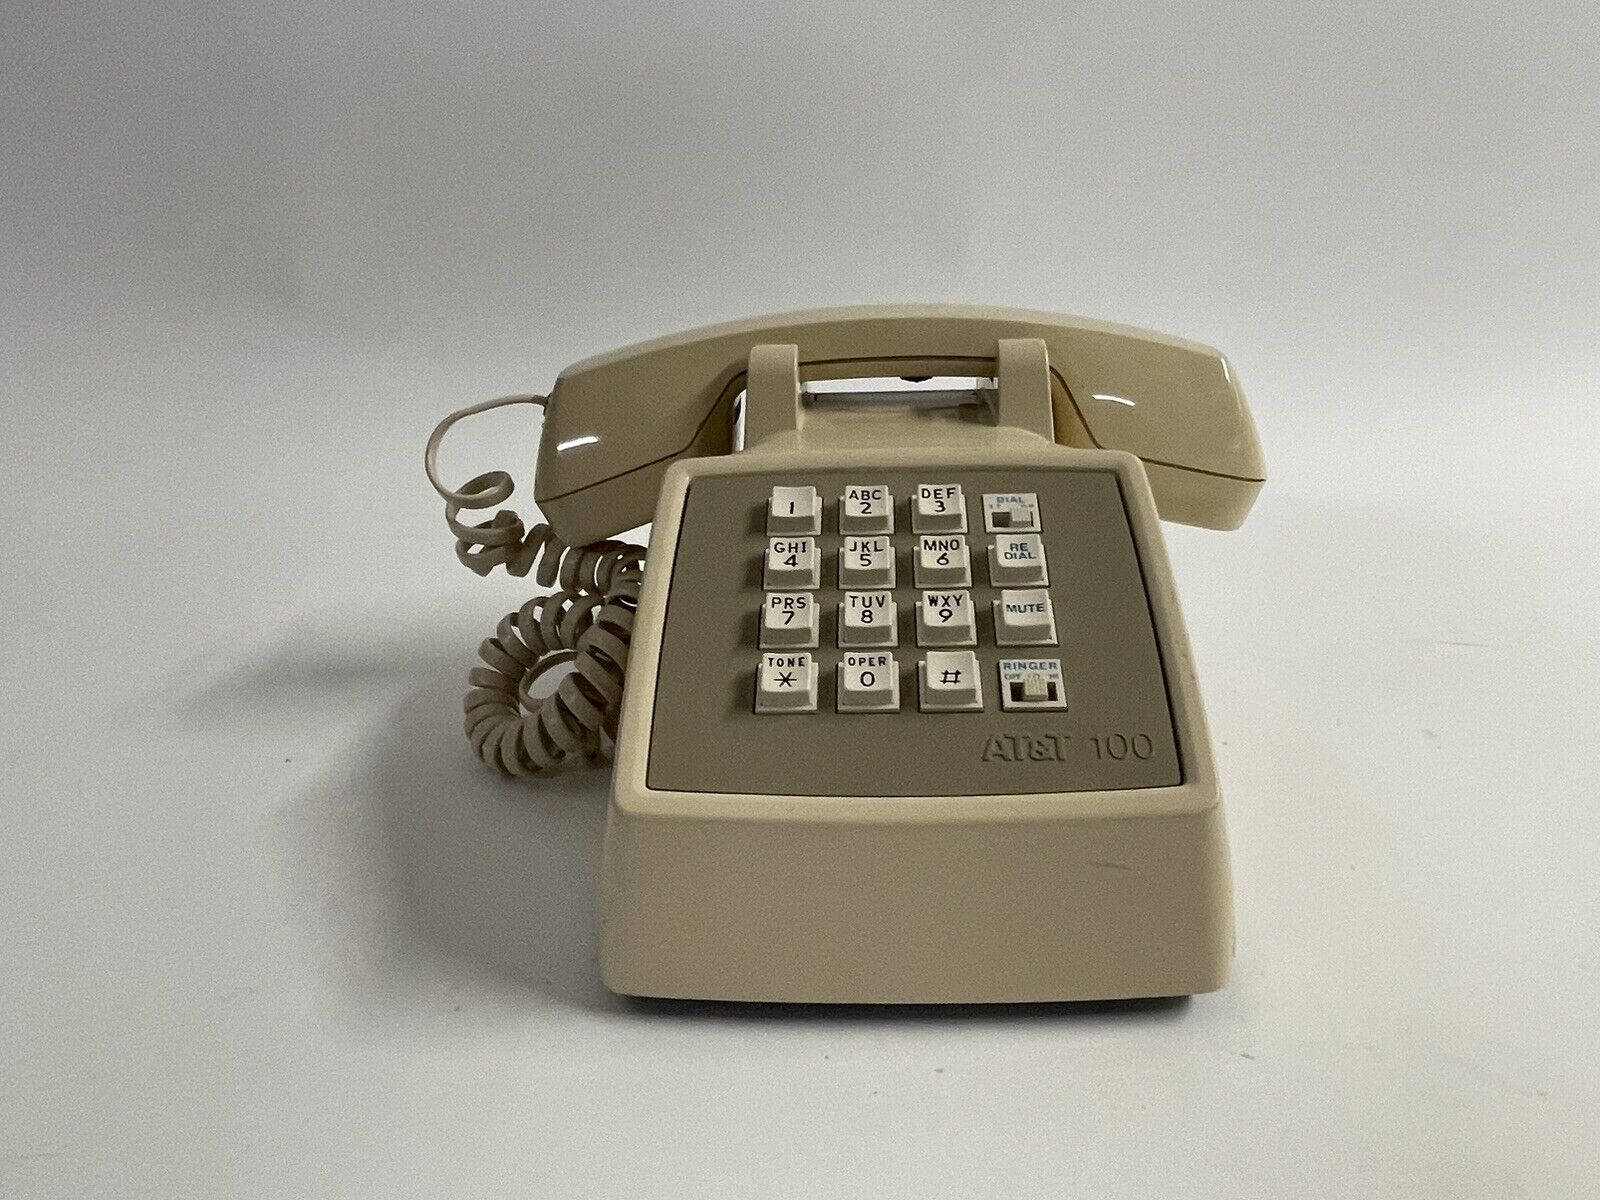 Vintage AT&T 100 Push Button Phone Desk Telephone Re-dial Mute